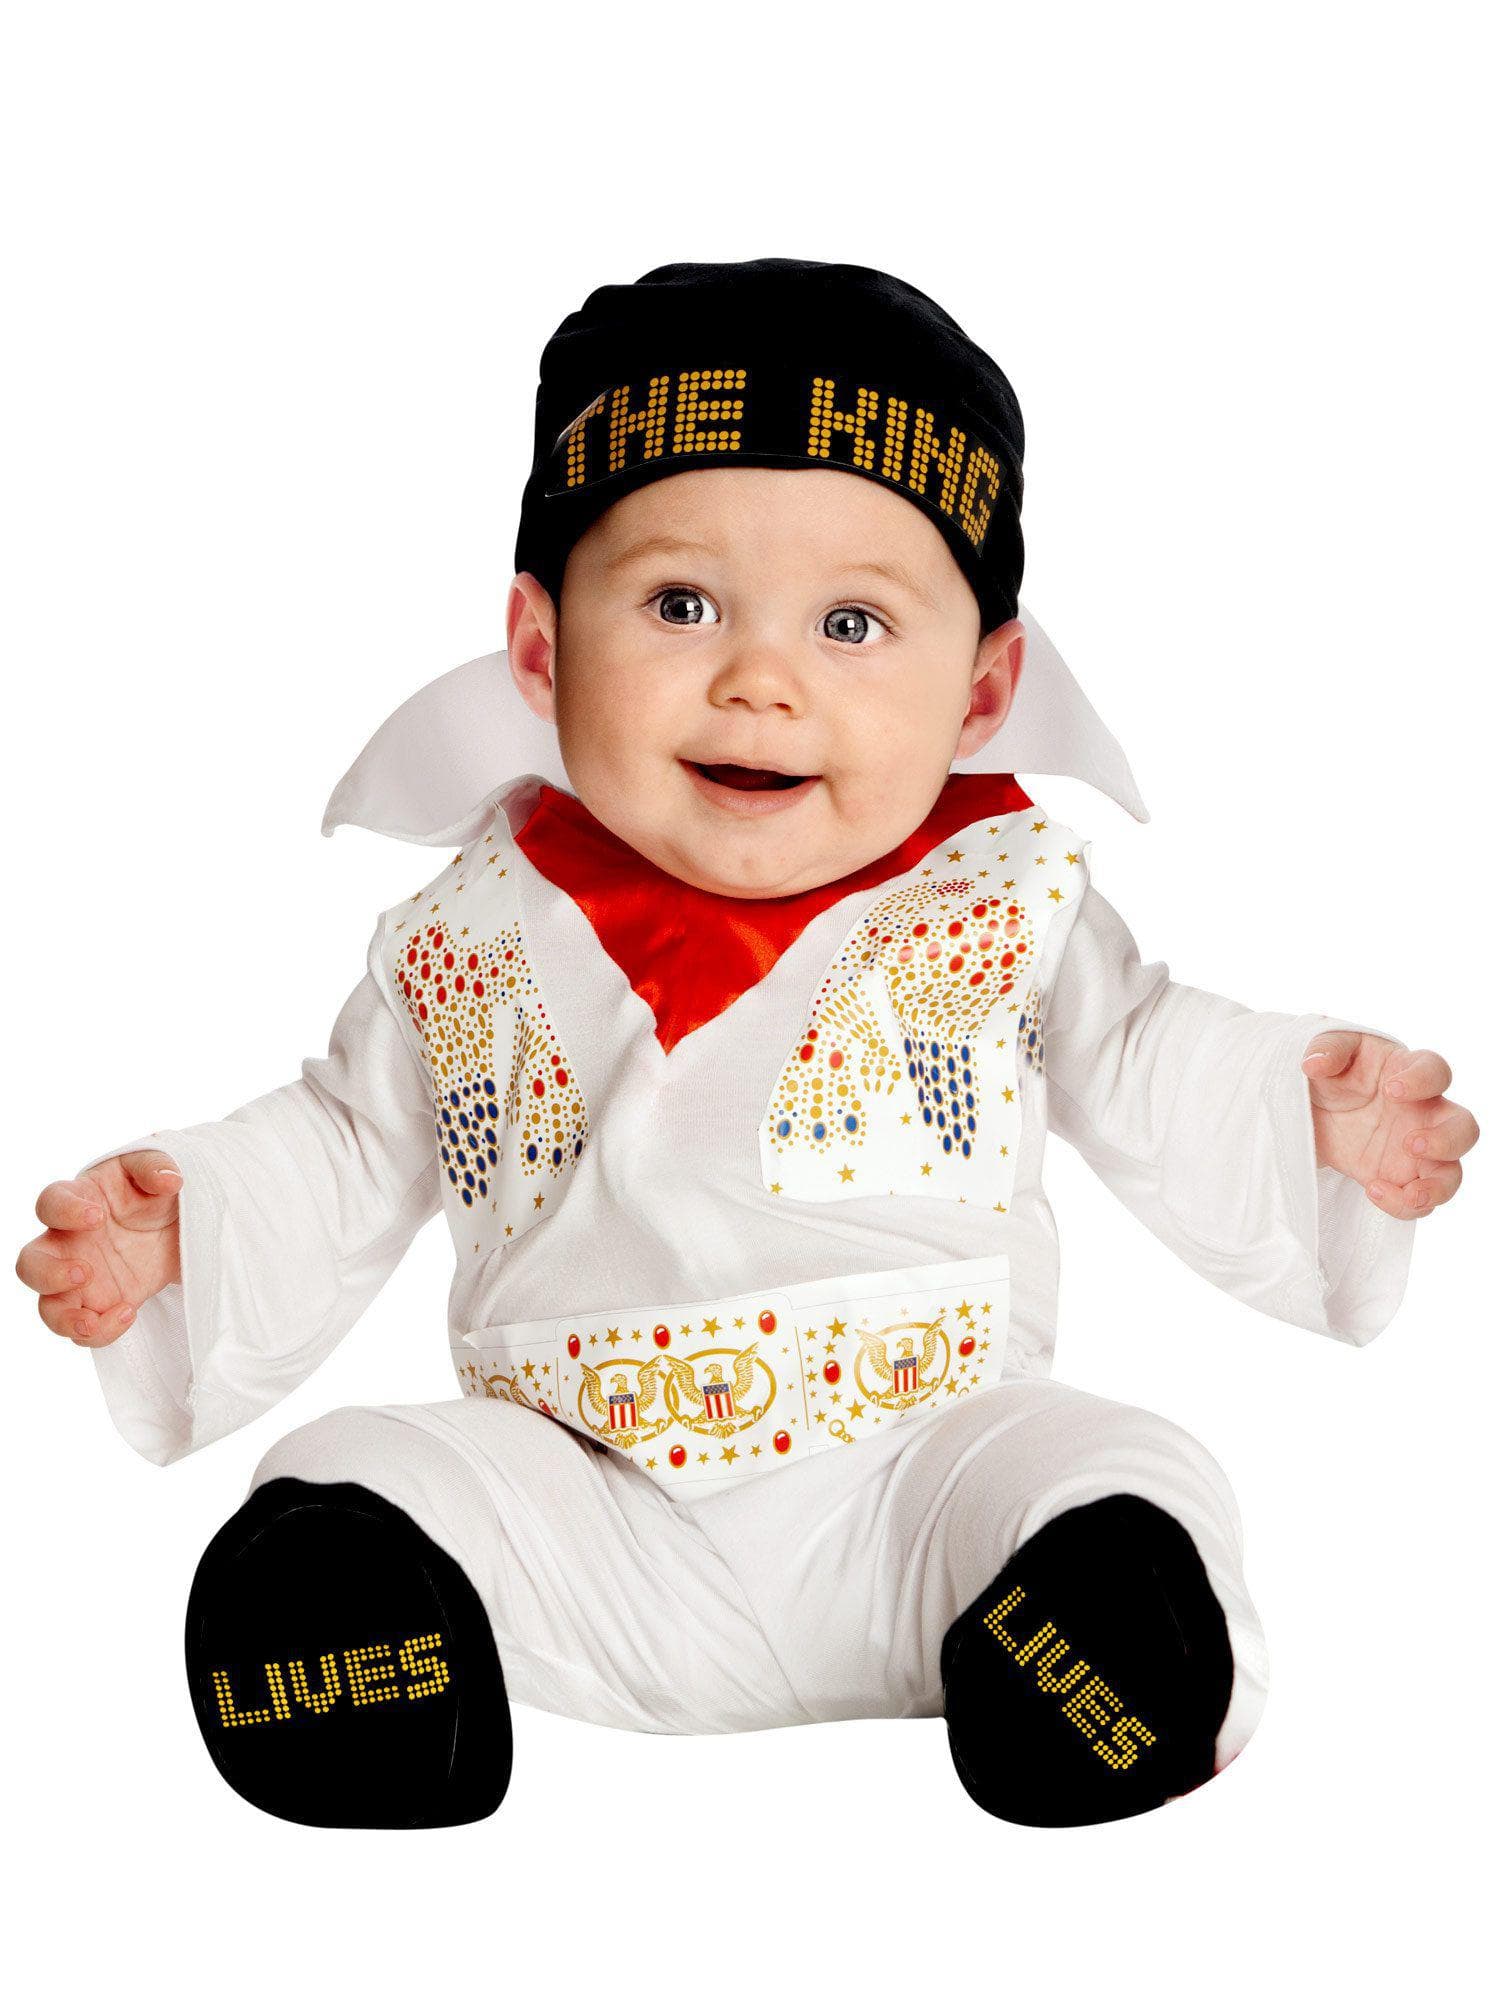 The King Lives Elvis Costume for Babies - costumes.com